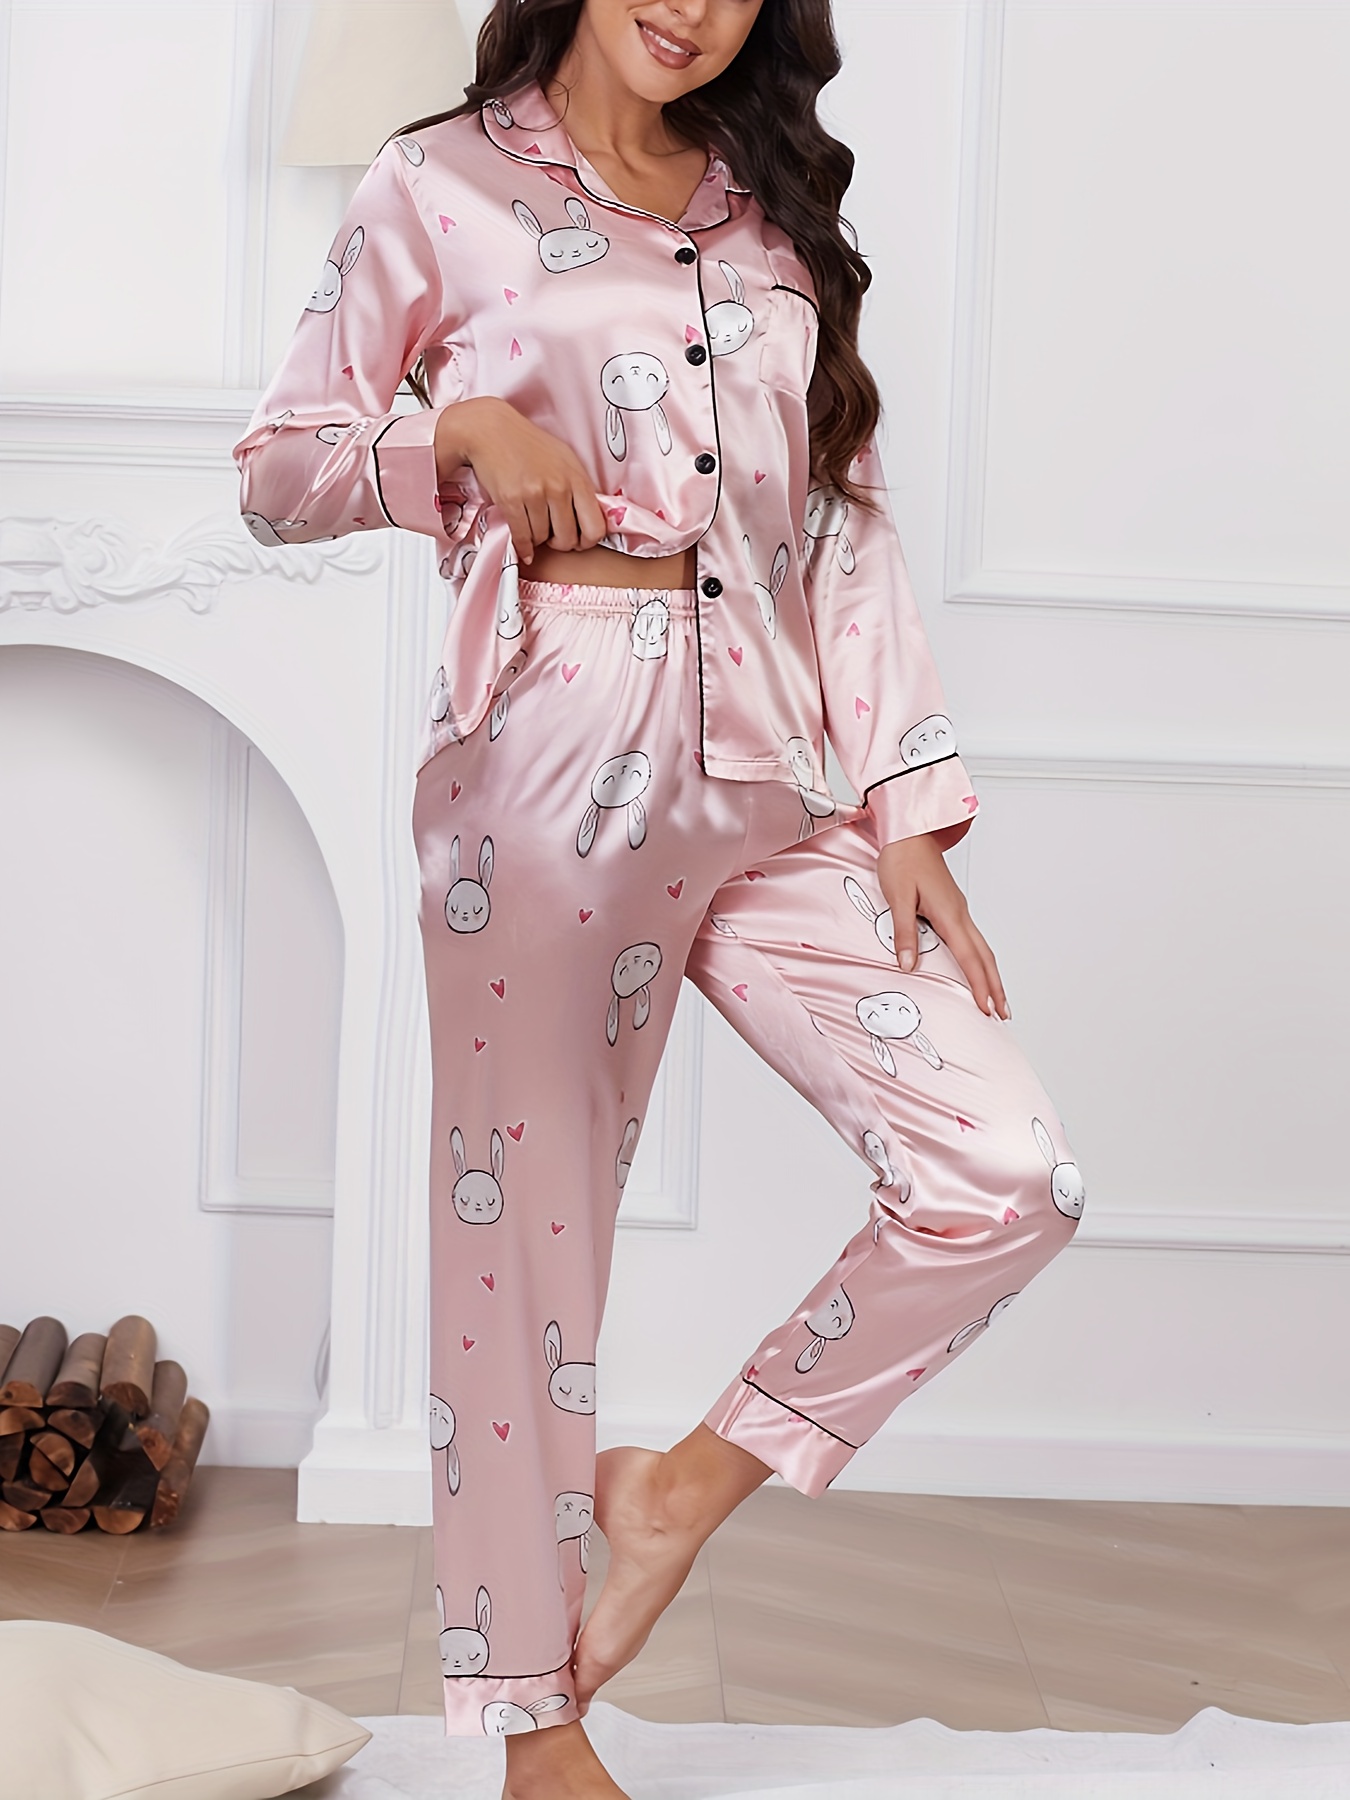 Cute Puppy Full Sleeves 2 Piece Buttoned Pyjama Set Night Suit - Pink